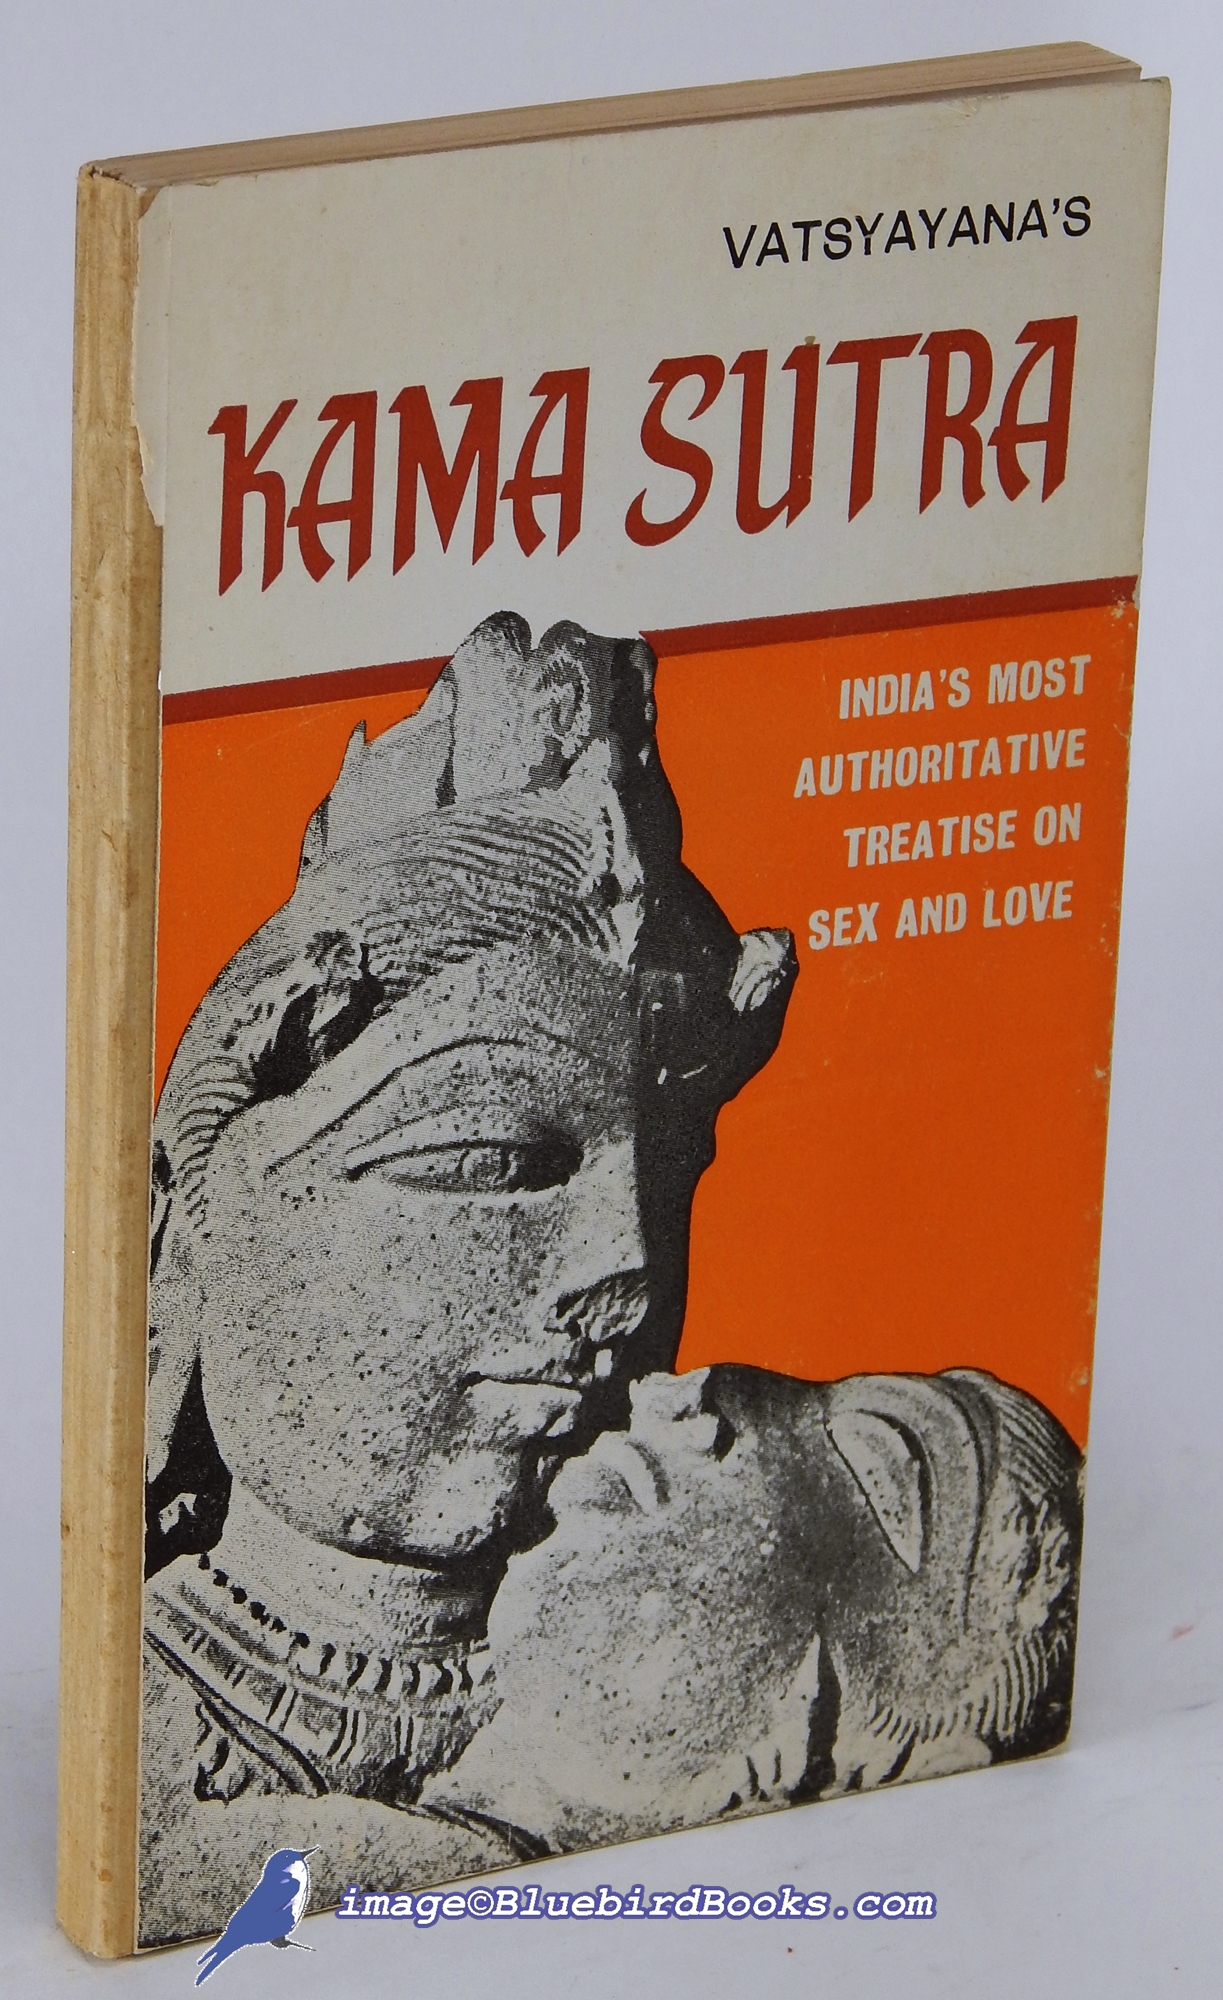 Cuddle sutra book the The Cuddle